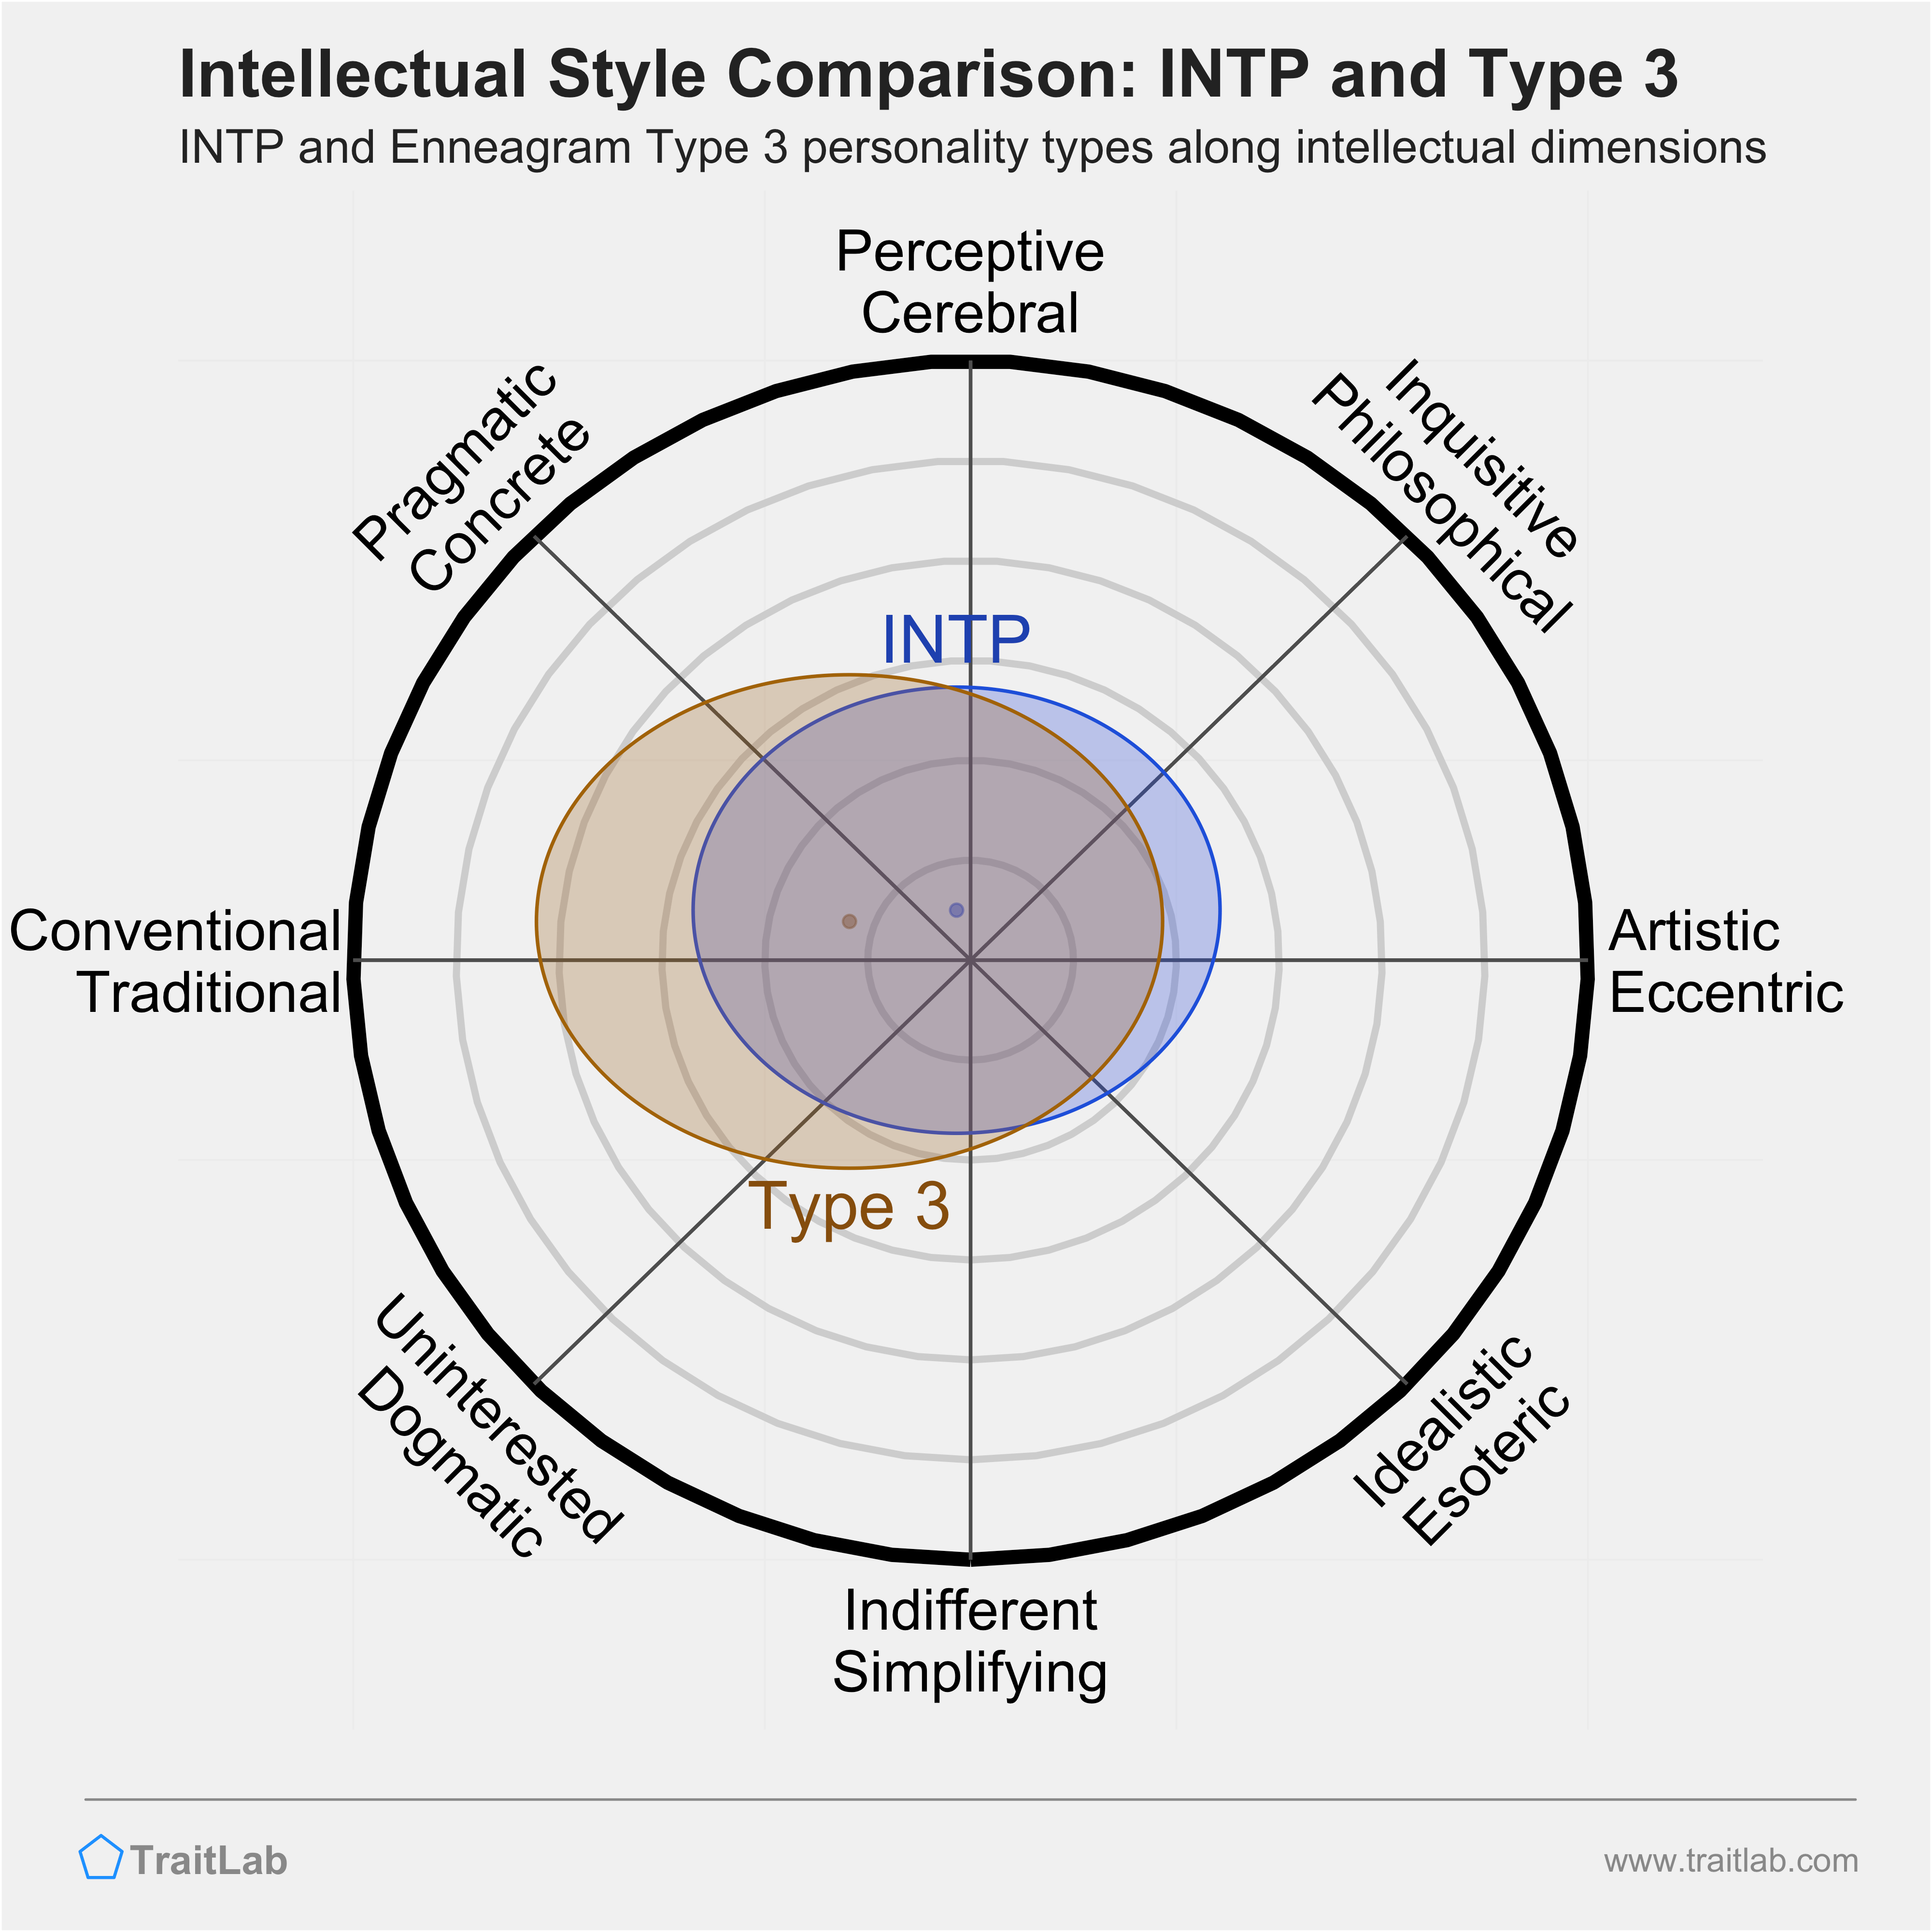 INTP and Type 3 comparison across intellectual dimensions